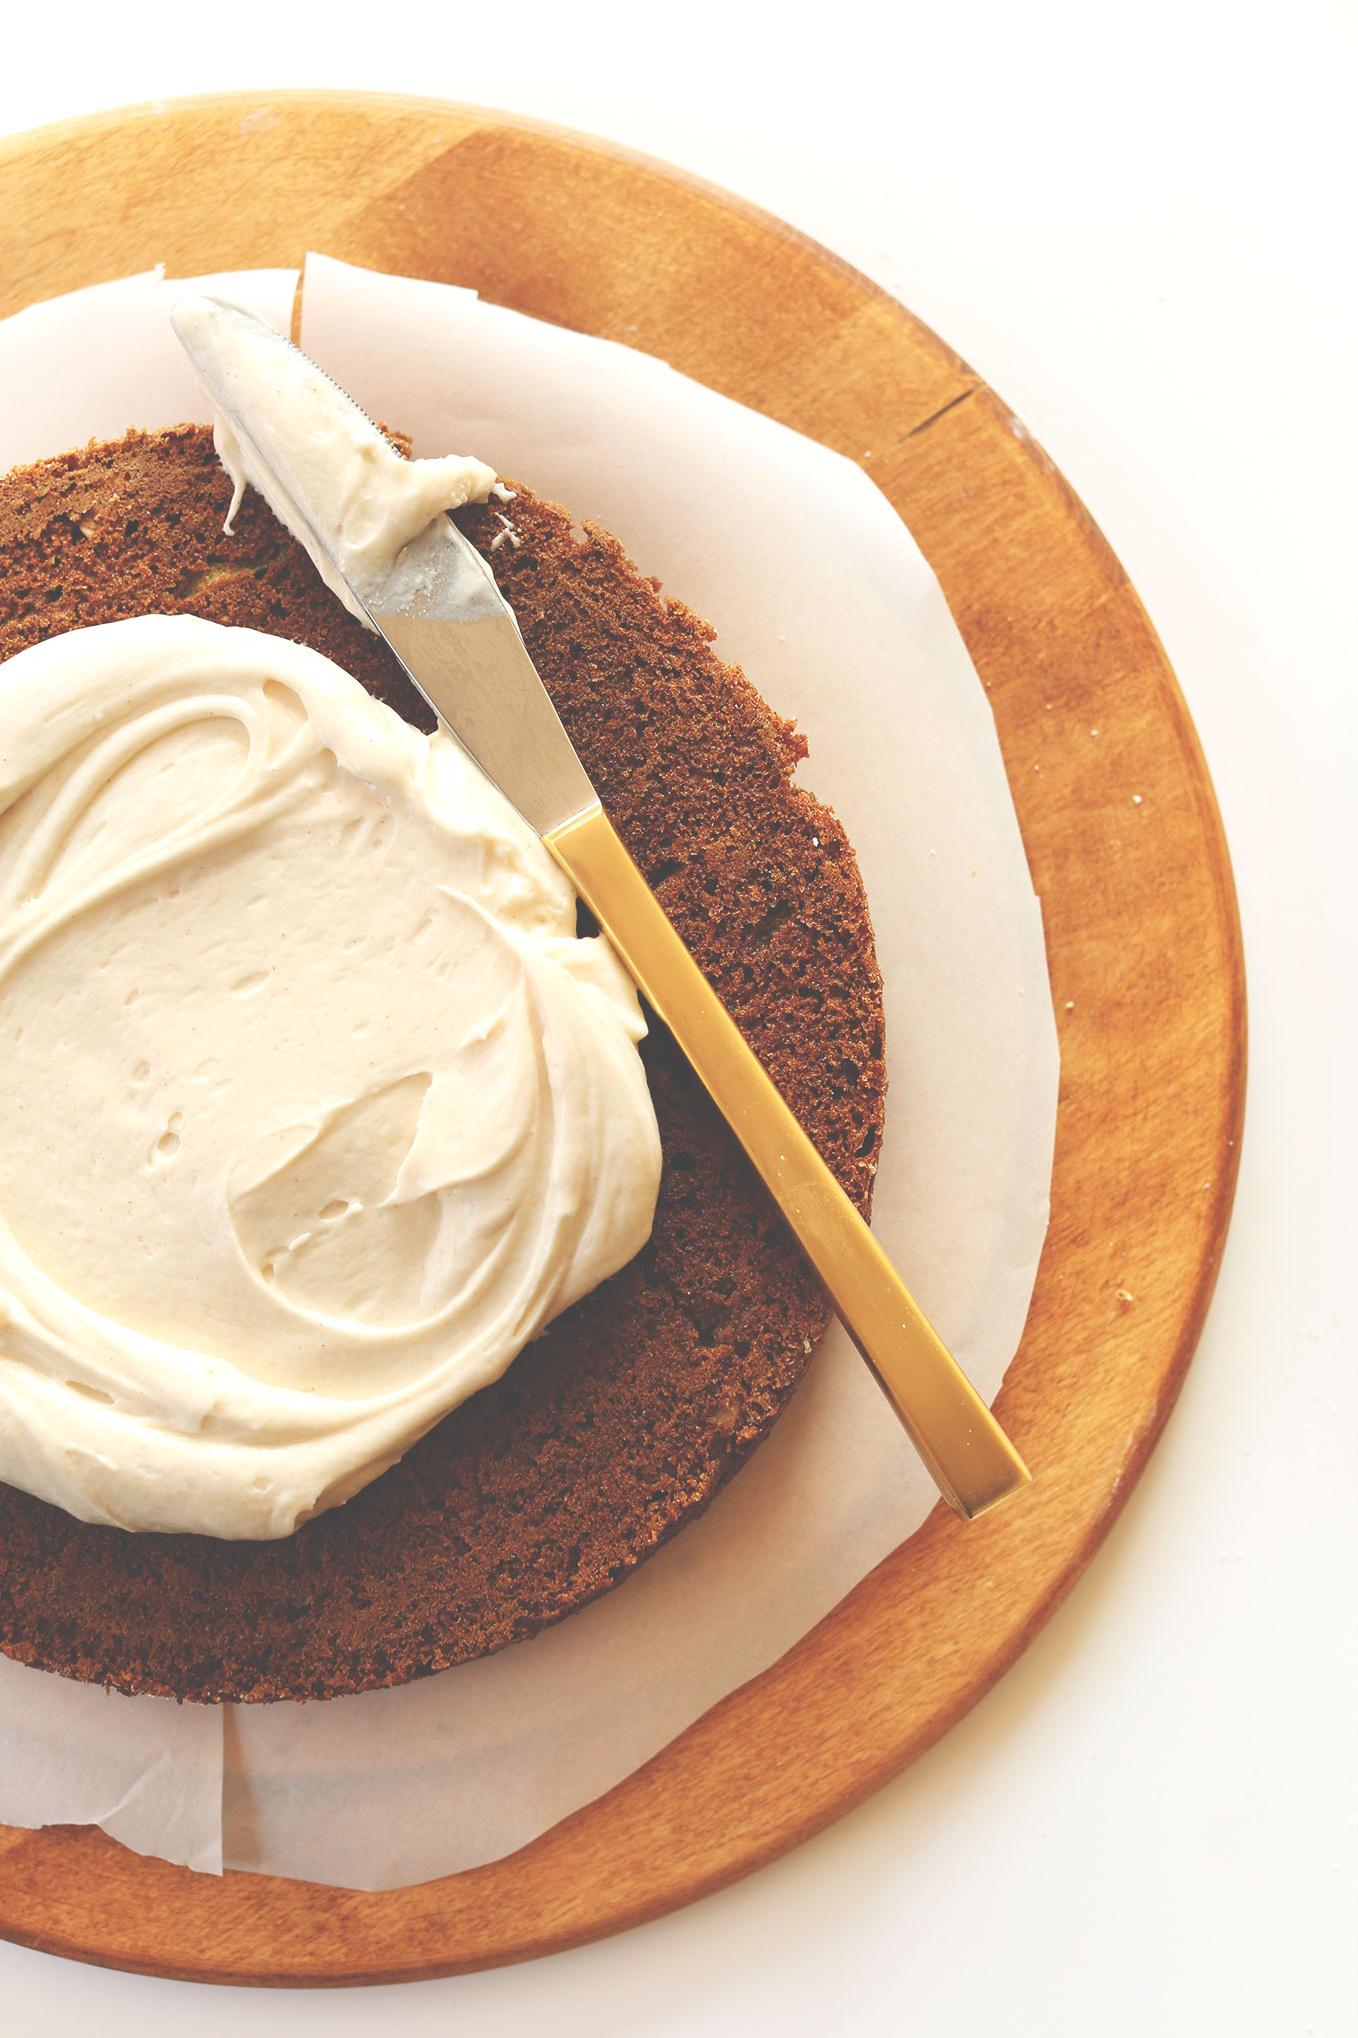  A perfect complement to any dessert, this vegan cream cheese frosting is sure to please